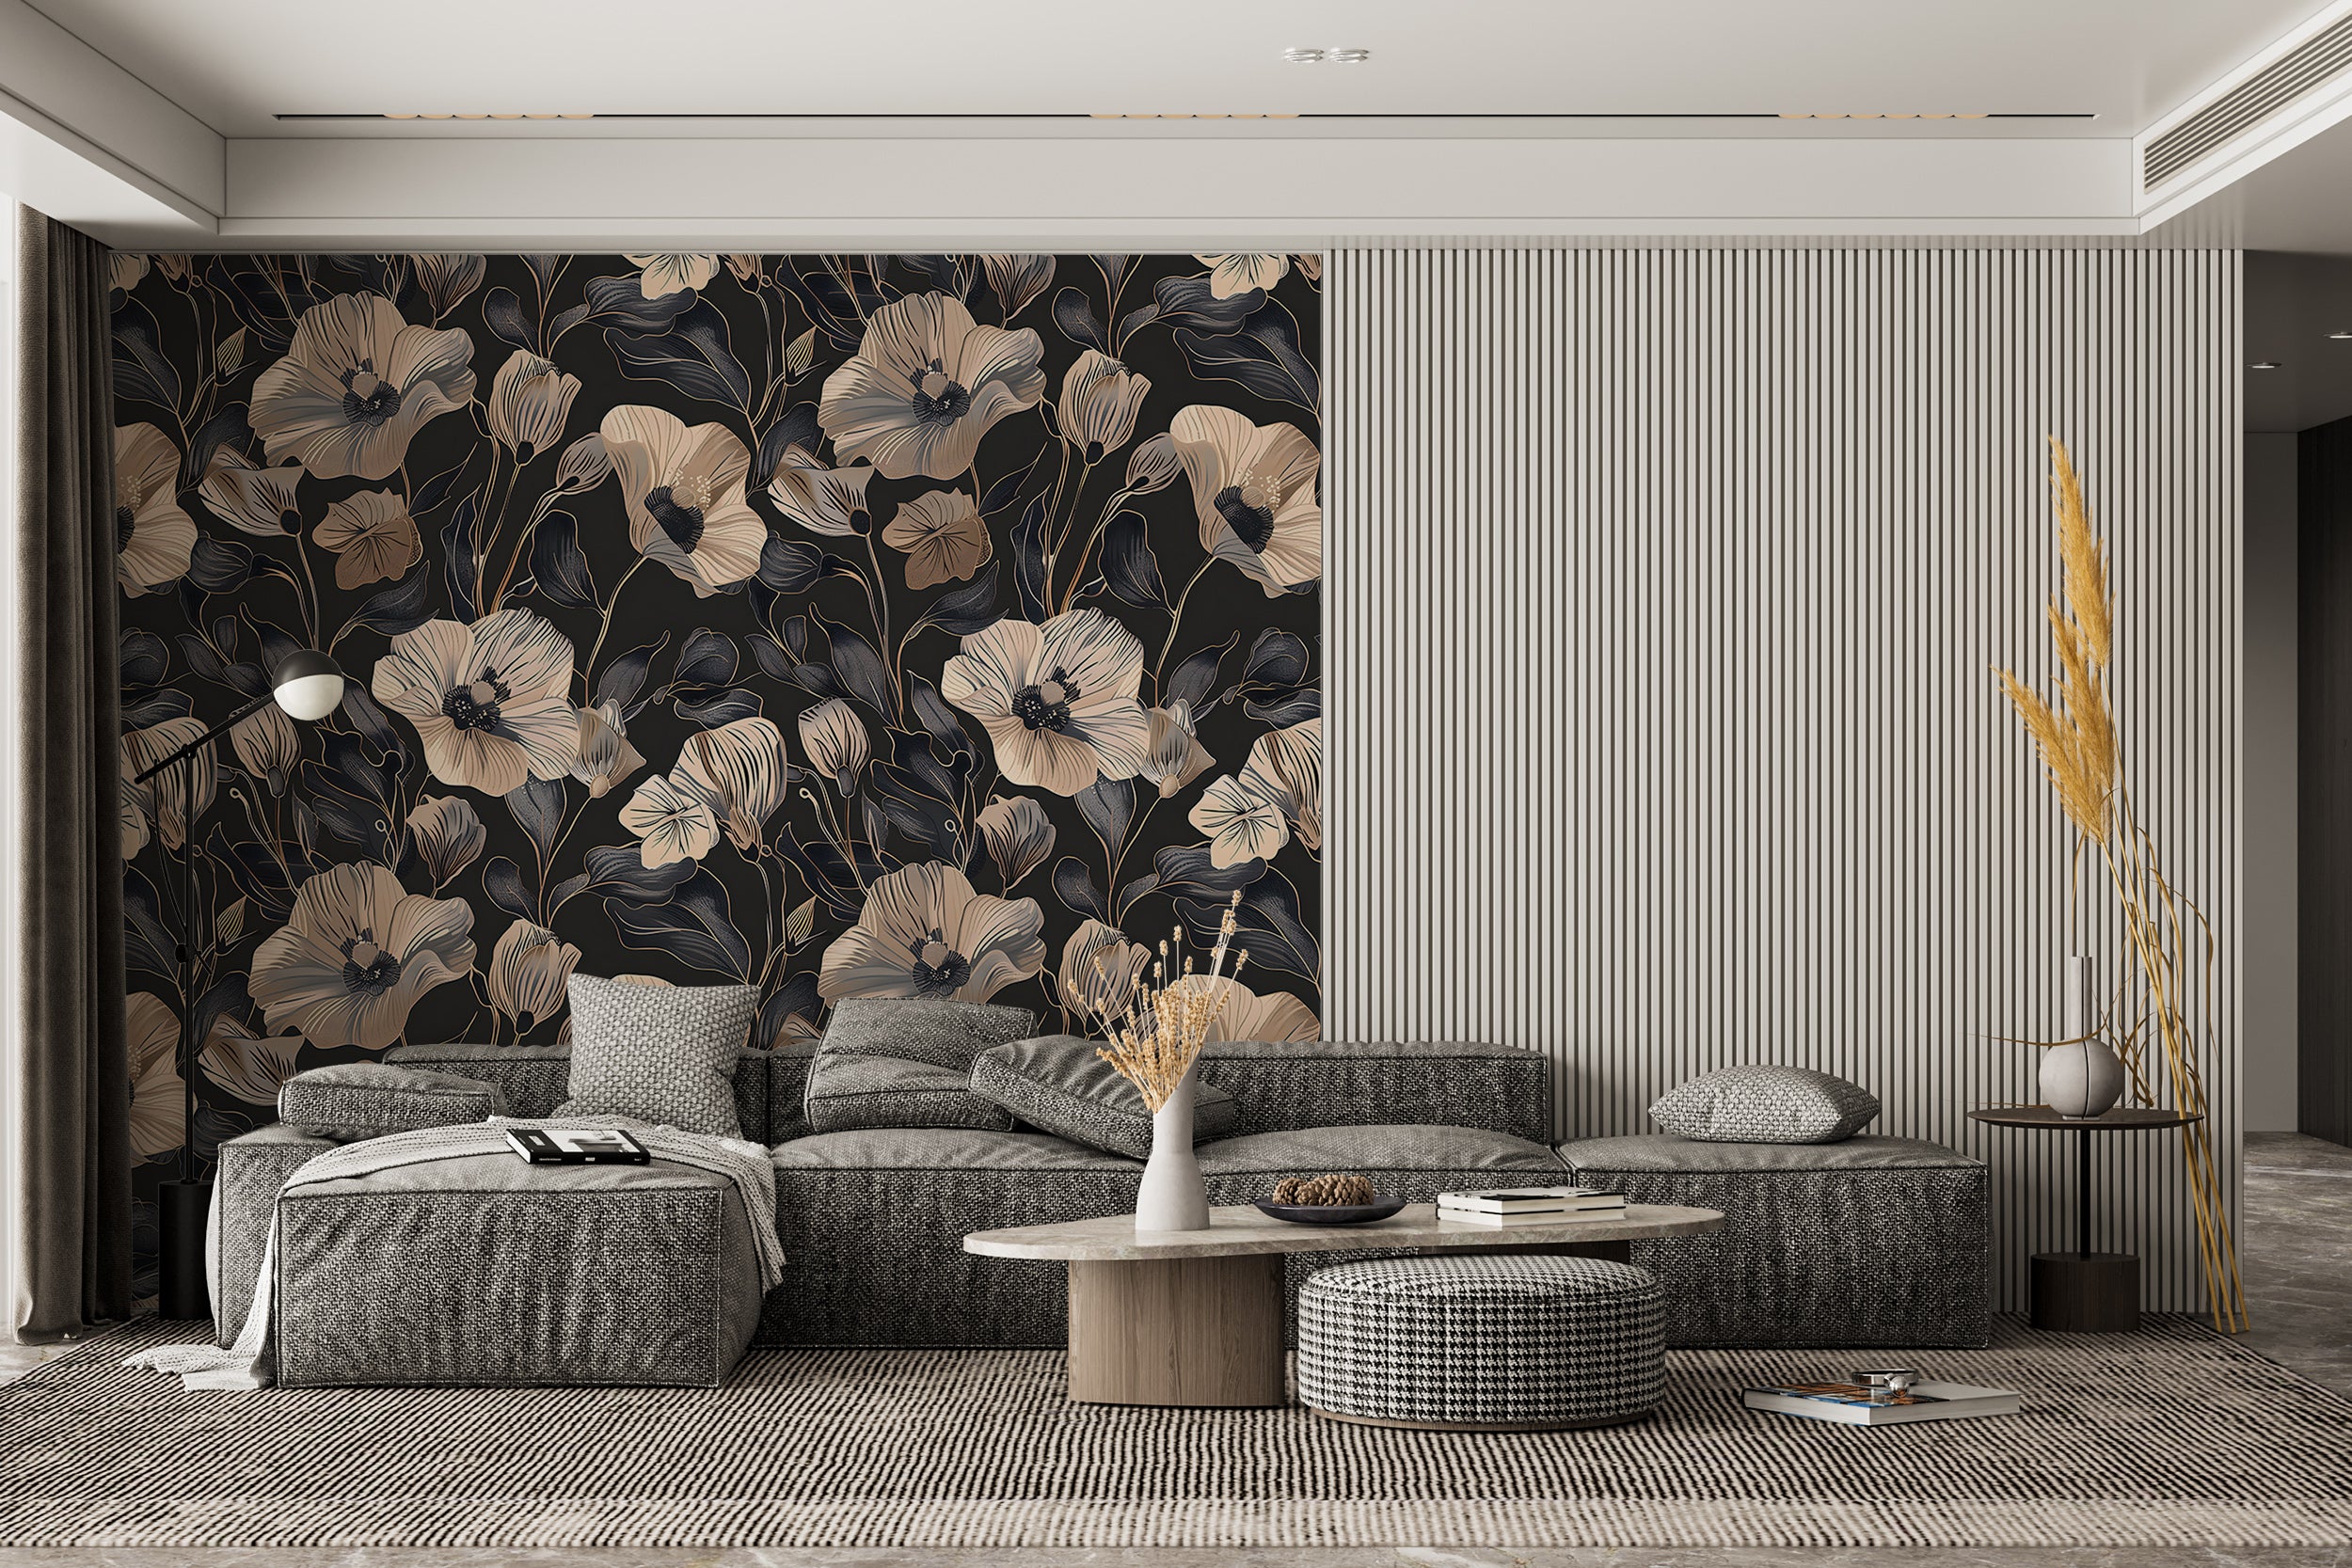 Dusty Rose and Dark Grey Floral Wallpaper, Peel and Stick Poppy Flowers Wall Decal, Removable Dark Botanical Decor, Pink & Black Flowers